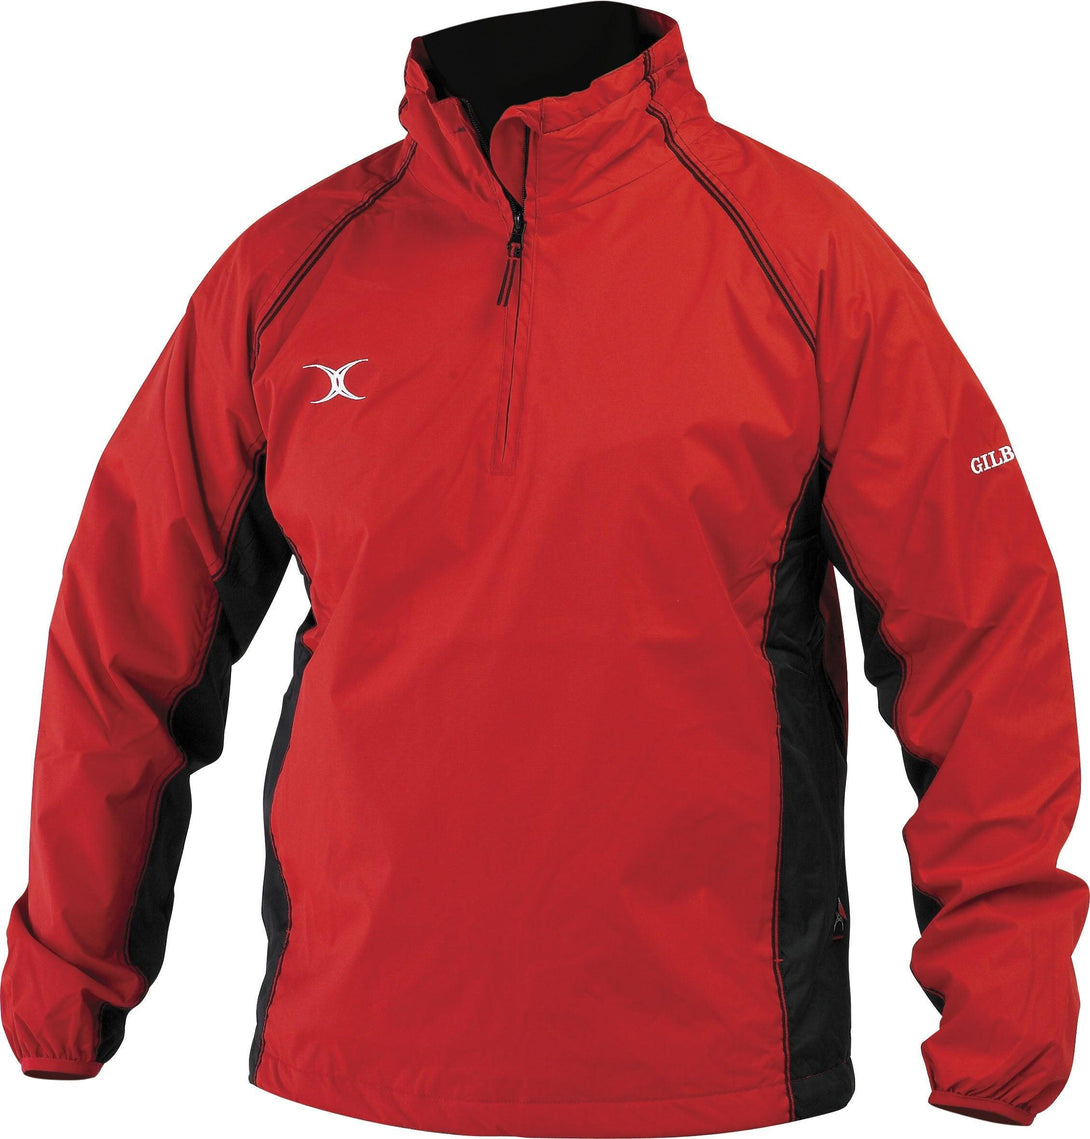 Rugby Heaven Gilbert Storm Jacket Adults - Red - www.rugby-heaven.co.uk